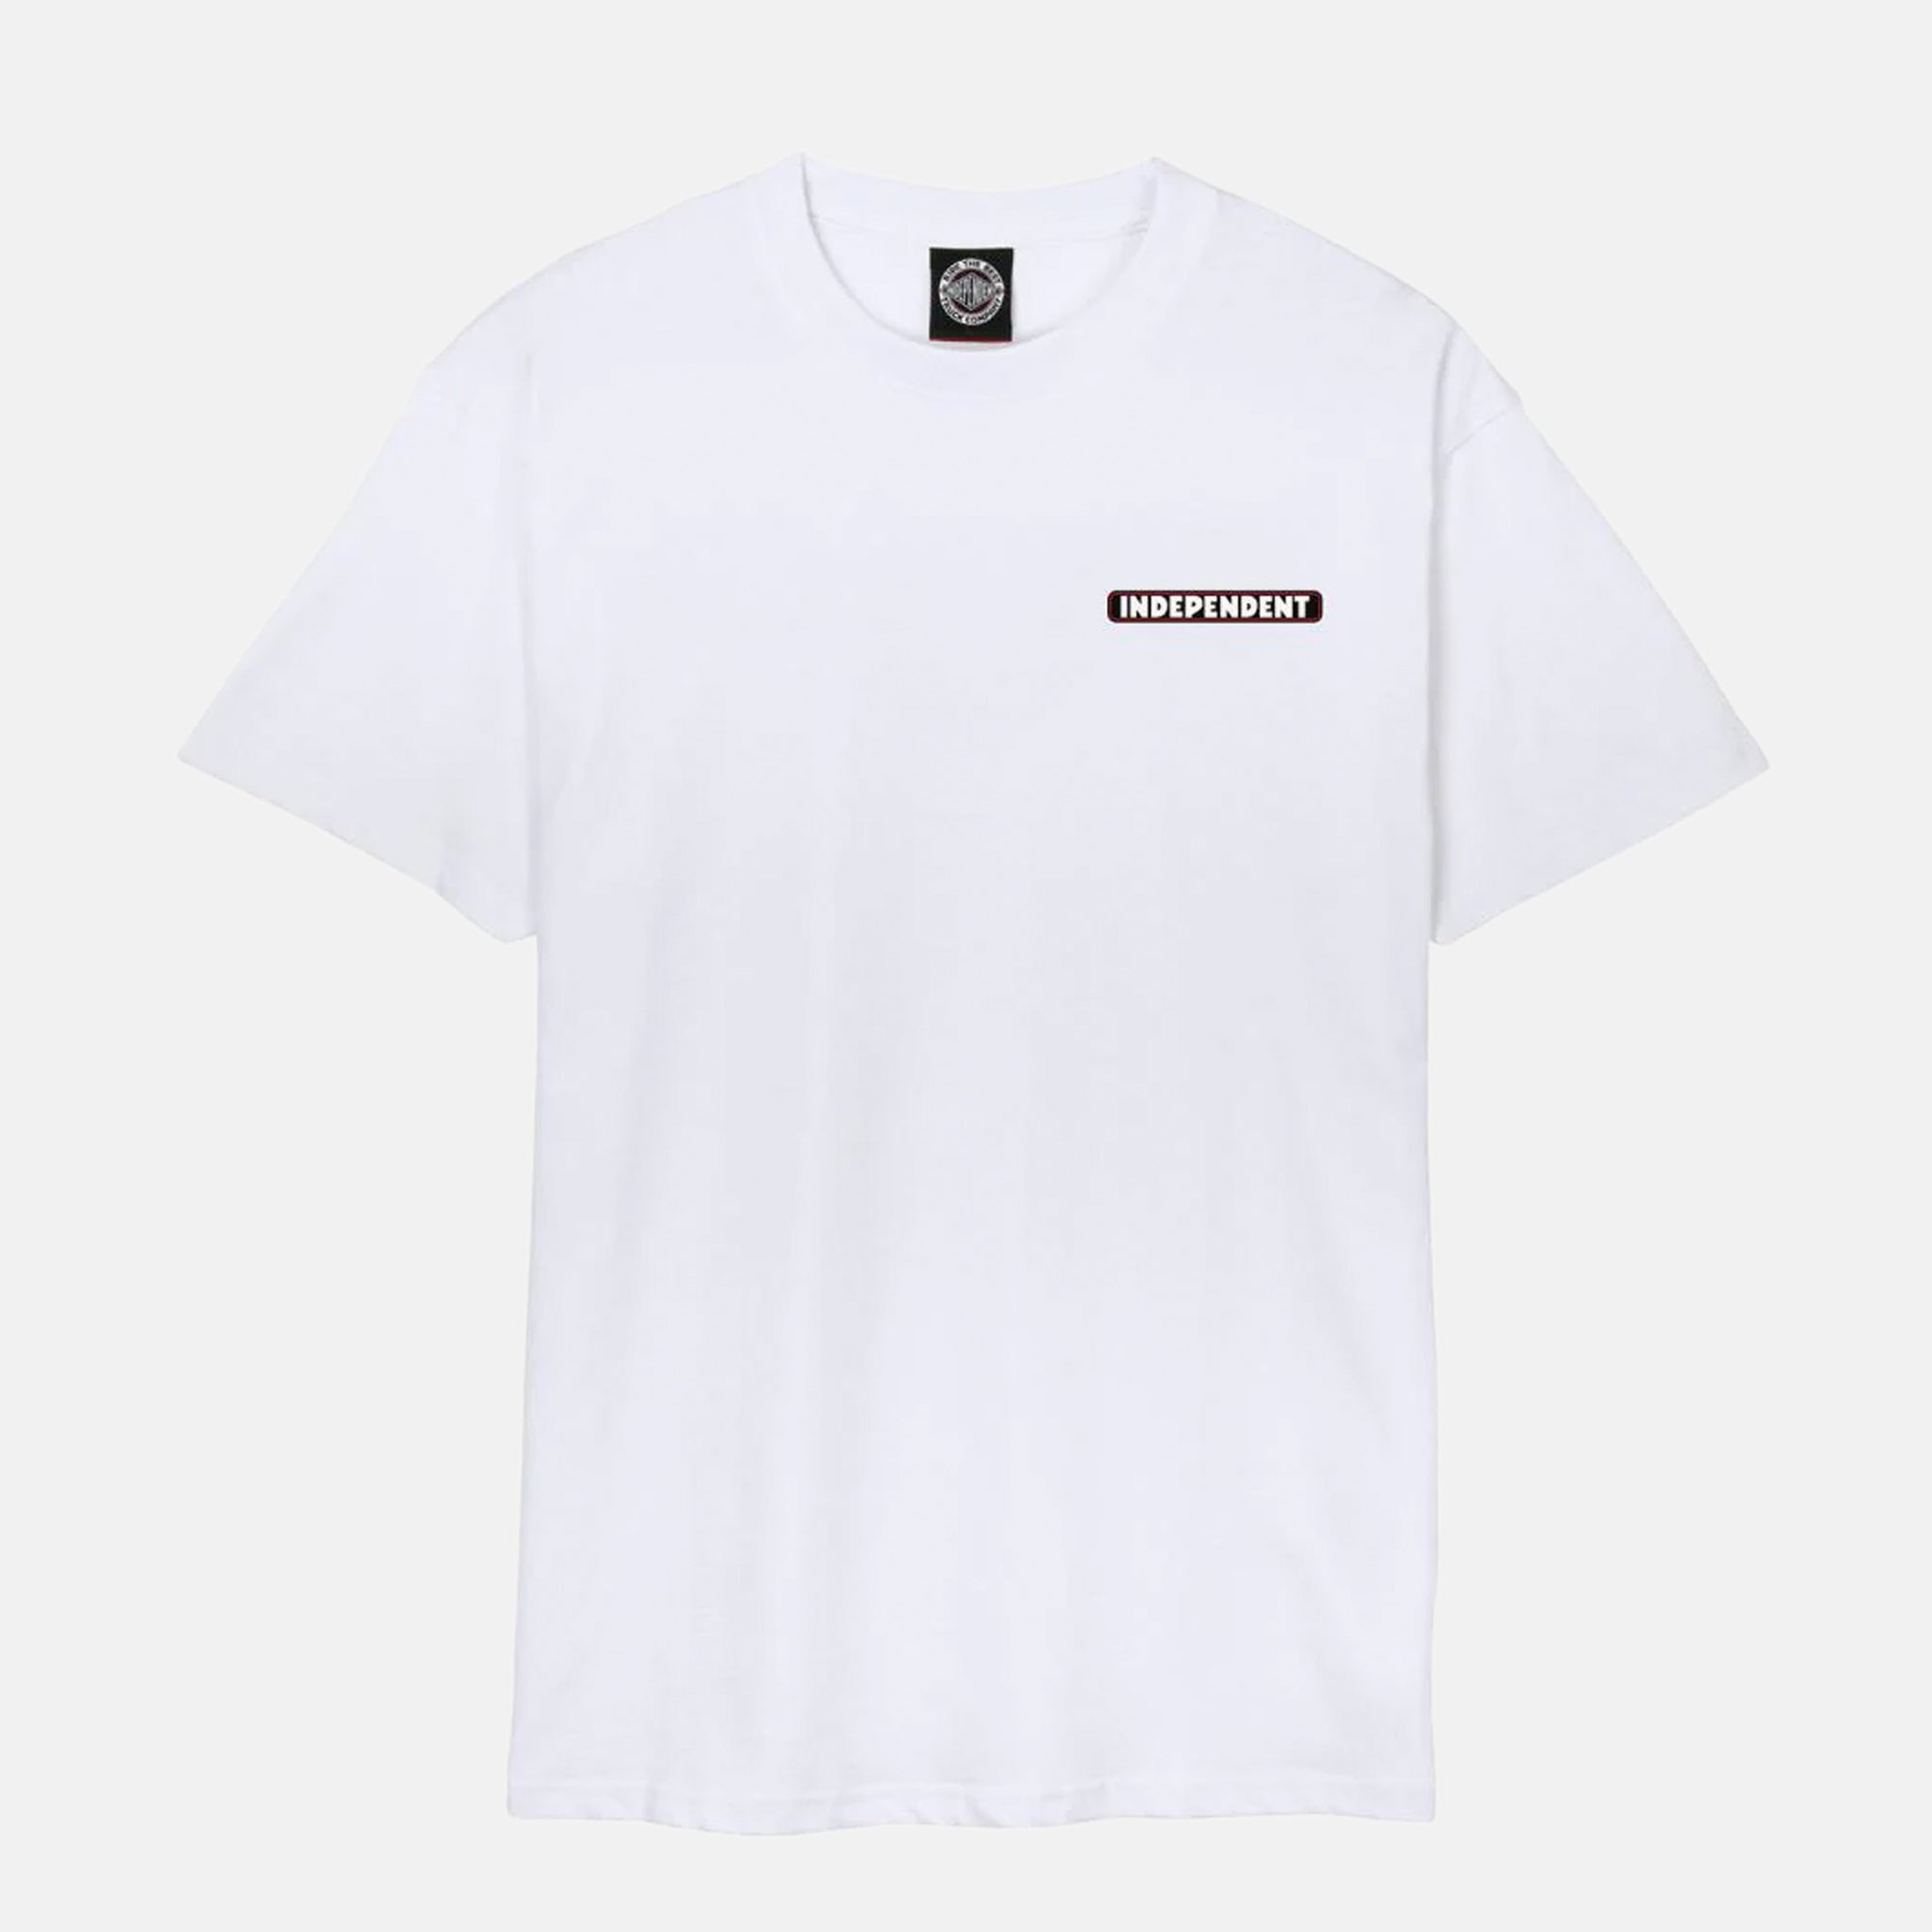 Independent Trucks - Keys To The City T-Shirt - White